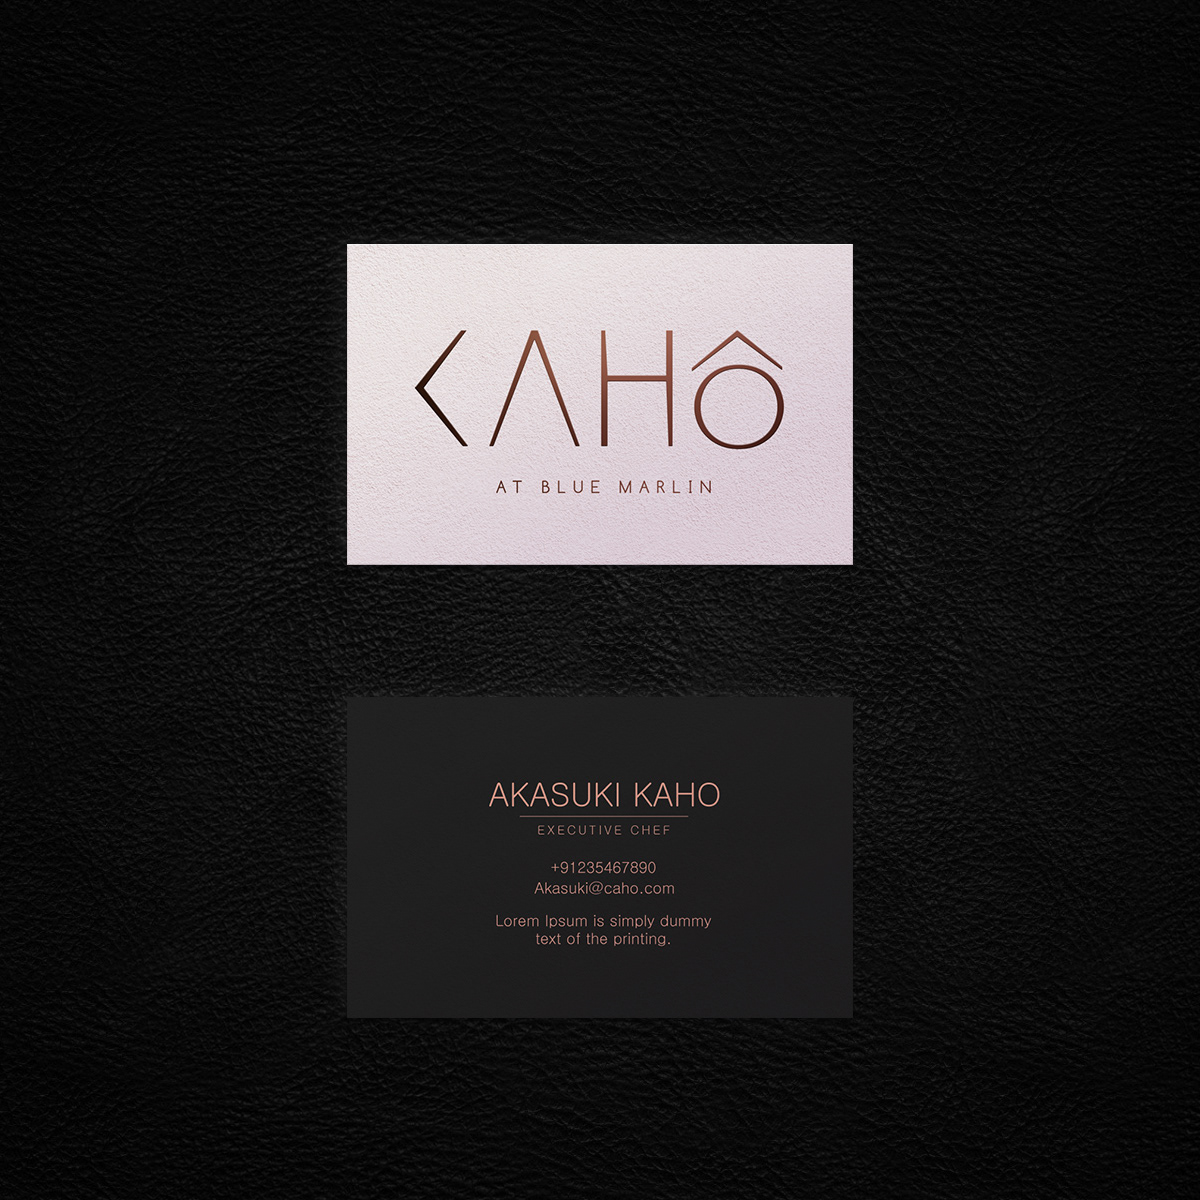 Visiting card of the executive chef of the restaurant 